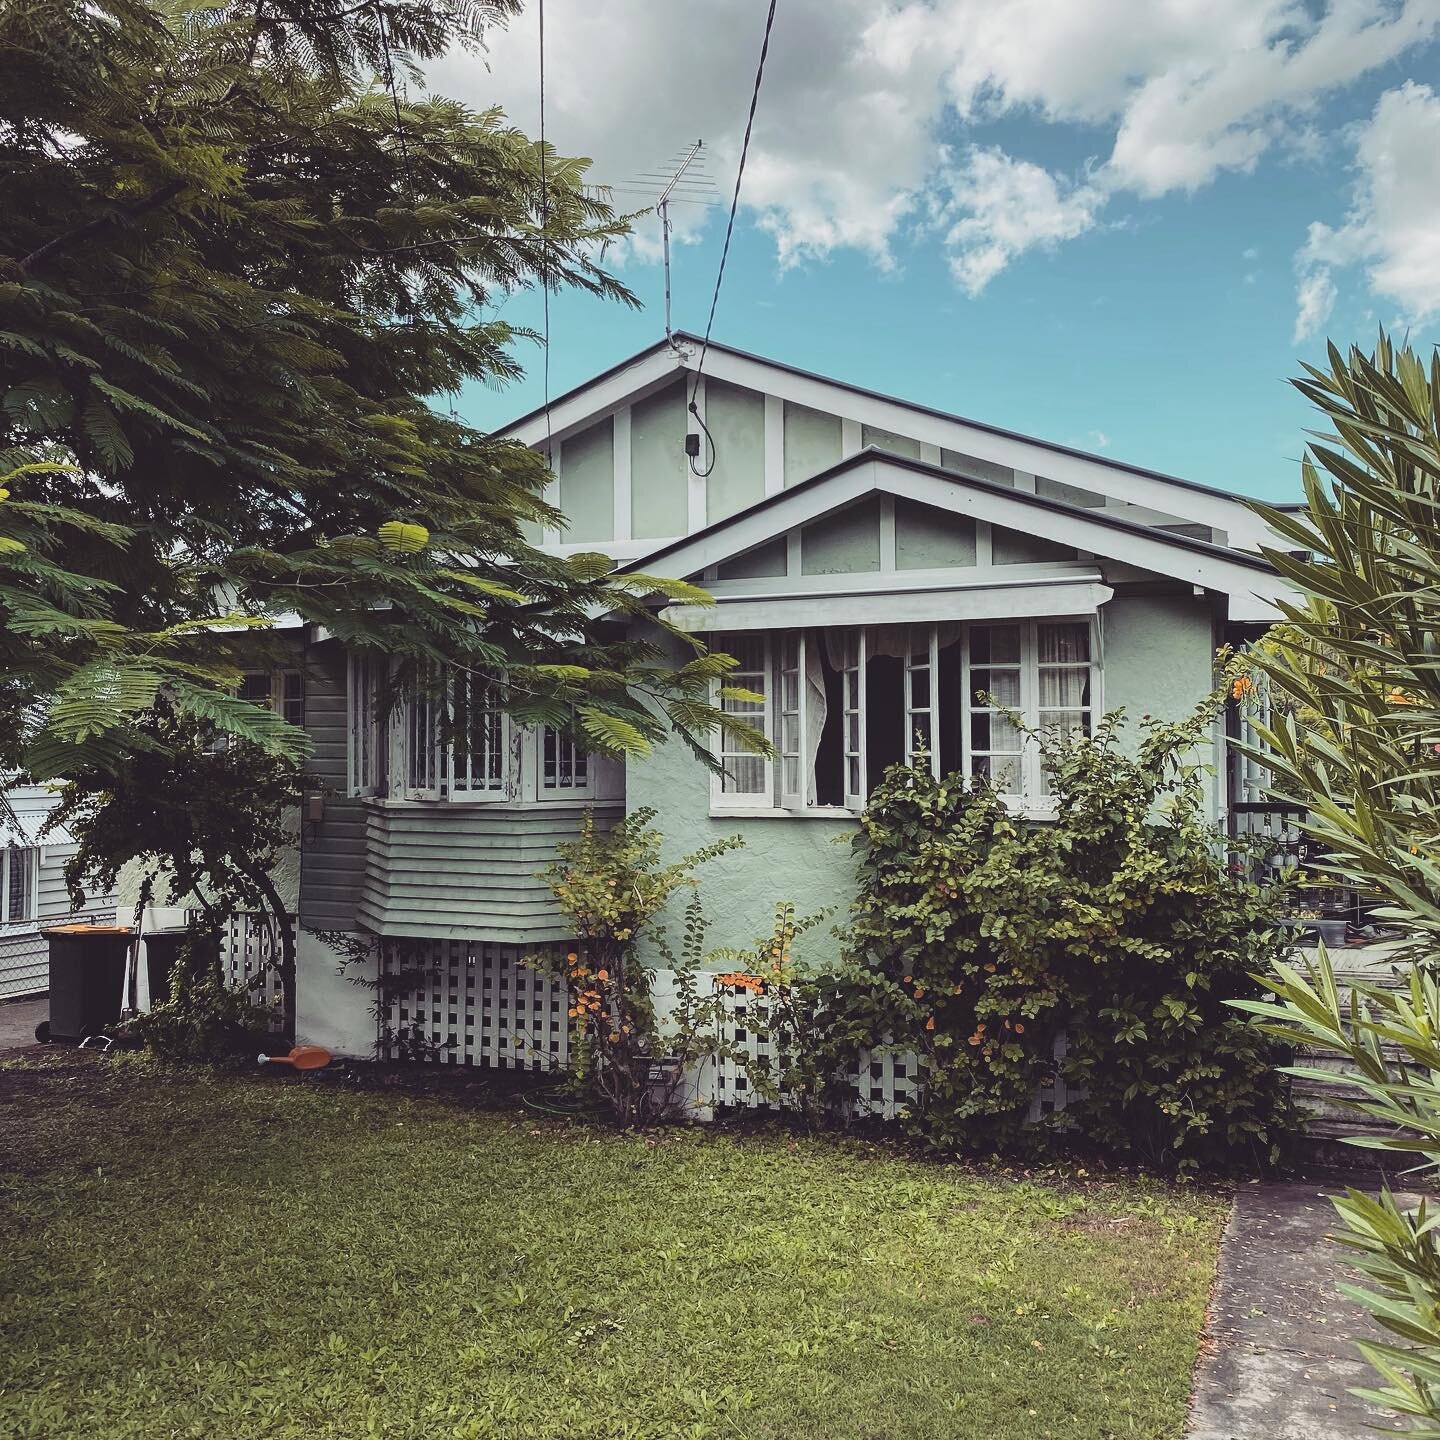 New Project. Ashgrove character house renovation.
Double gable with inferior gable (c.1920s-1930s).
...
#vbd2113 #ashgrove #brisbane #renovation #reno #queenslander #queenslanderhome #queenslanderhouse #queenslanderrenovation #weatherboard #weatherbo